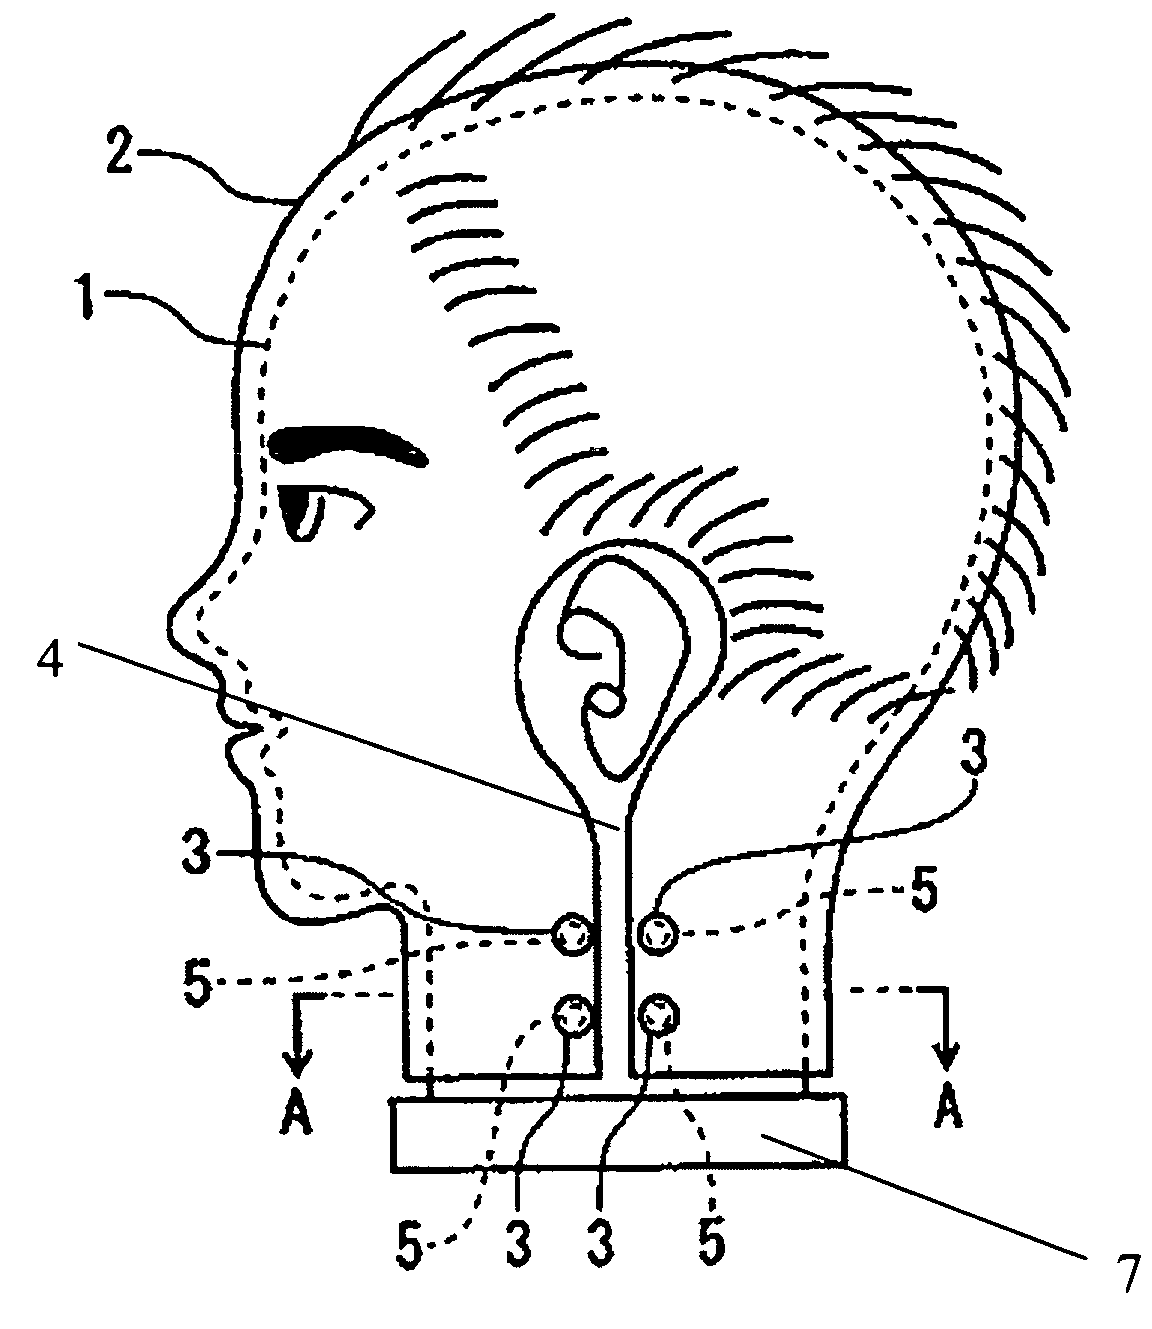 Head model for hairdressing and beauty training